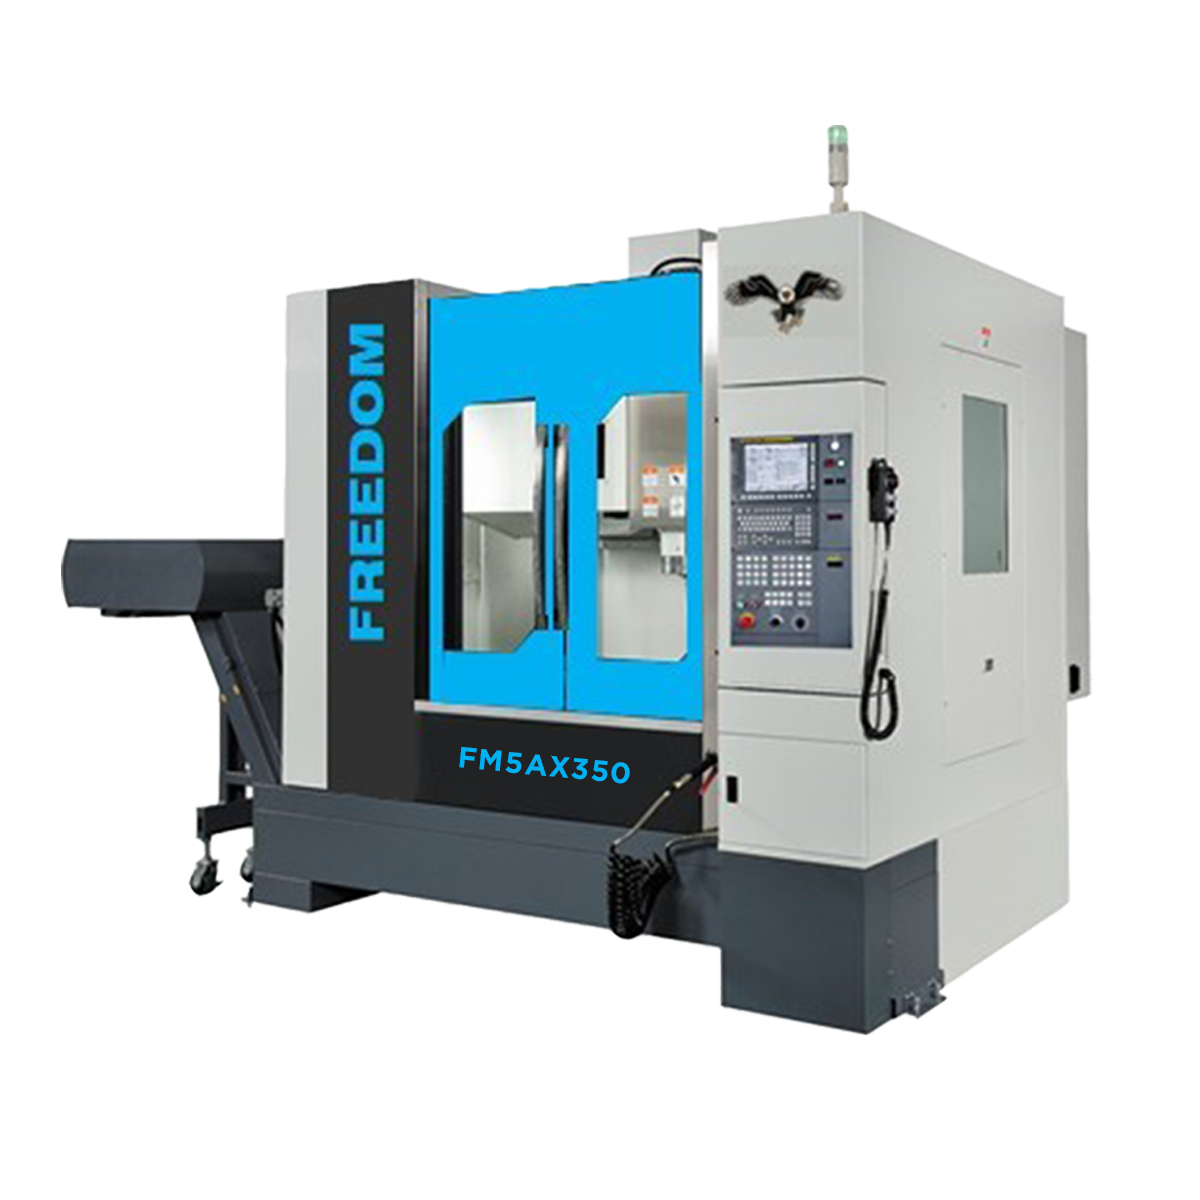 FREEDOM FM5AX350 5-Axis Machines | All American Sales and Service, Inc.